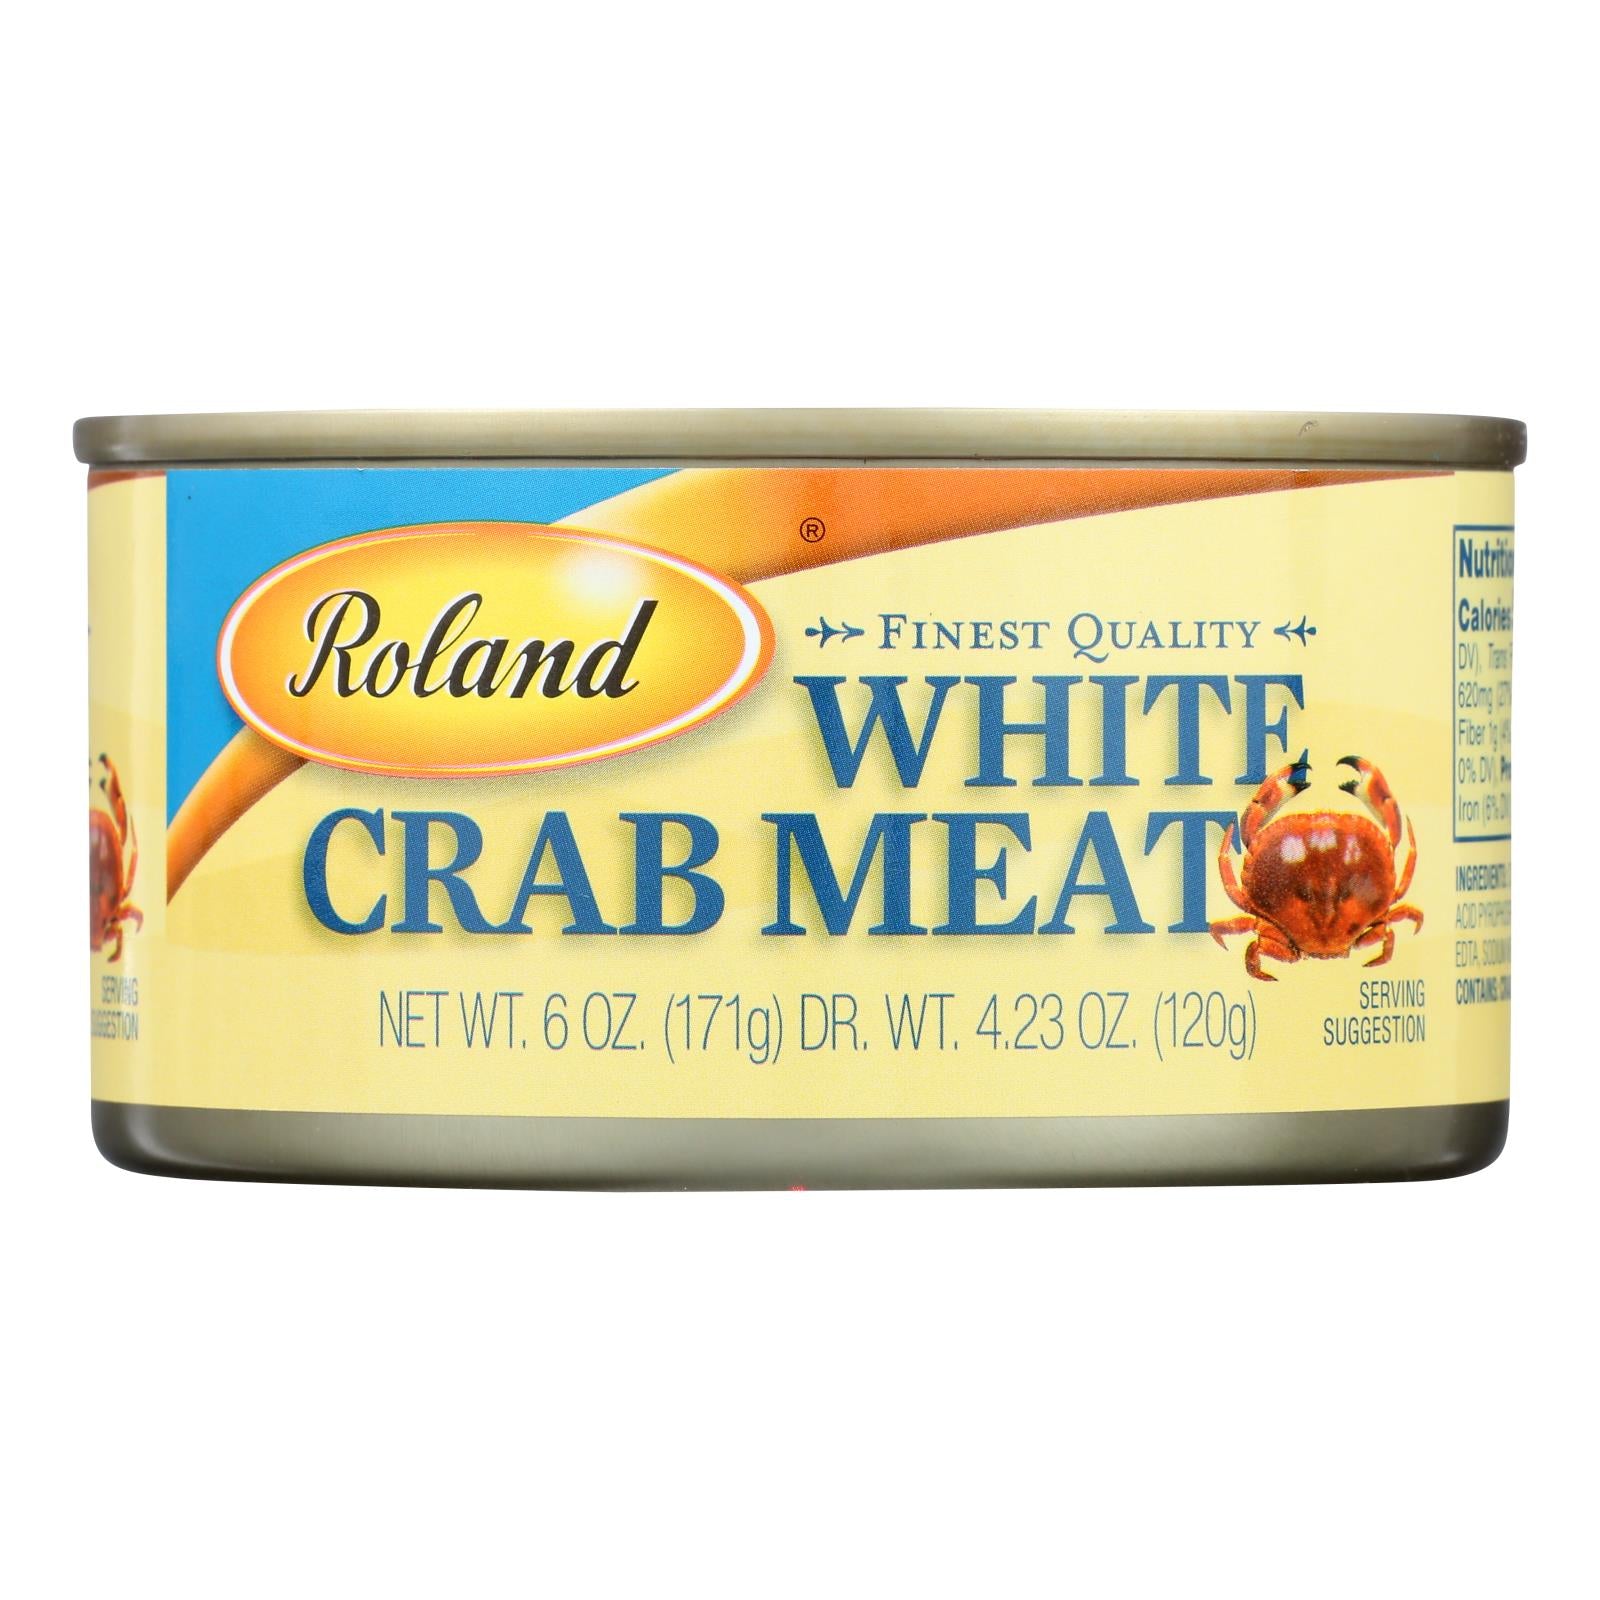 Roland Finest Quality White Crab Meat  - 1 Each - 6 OZ